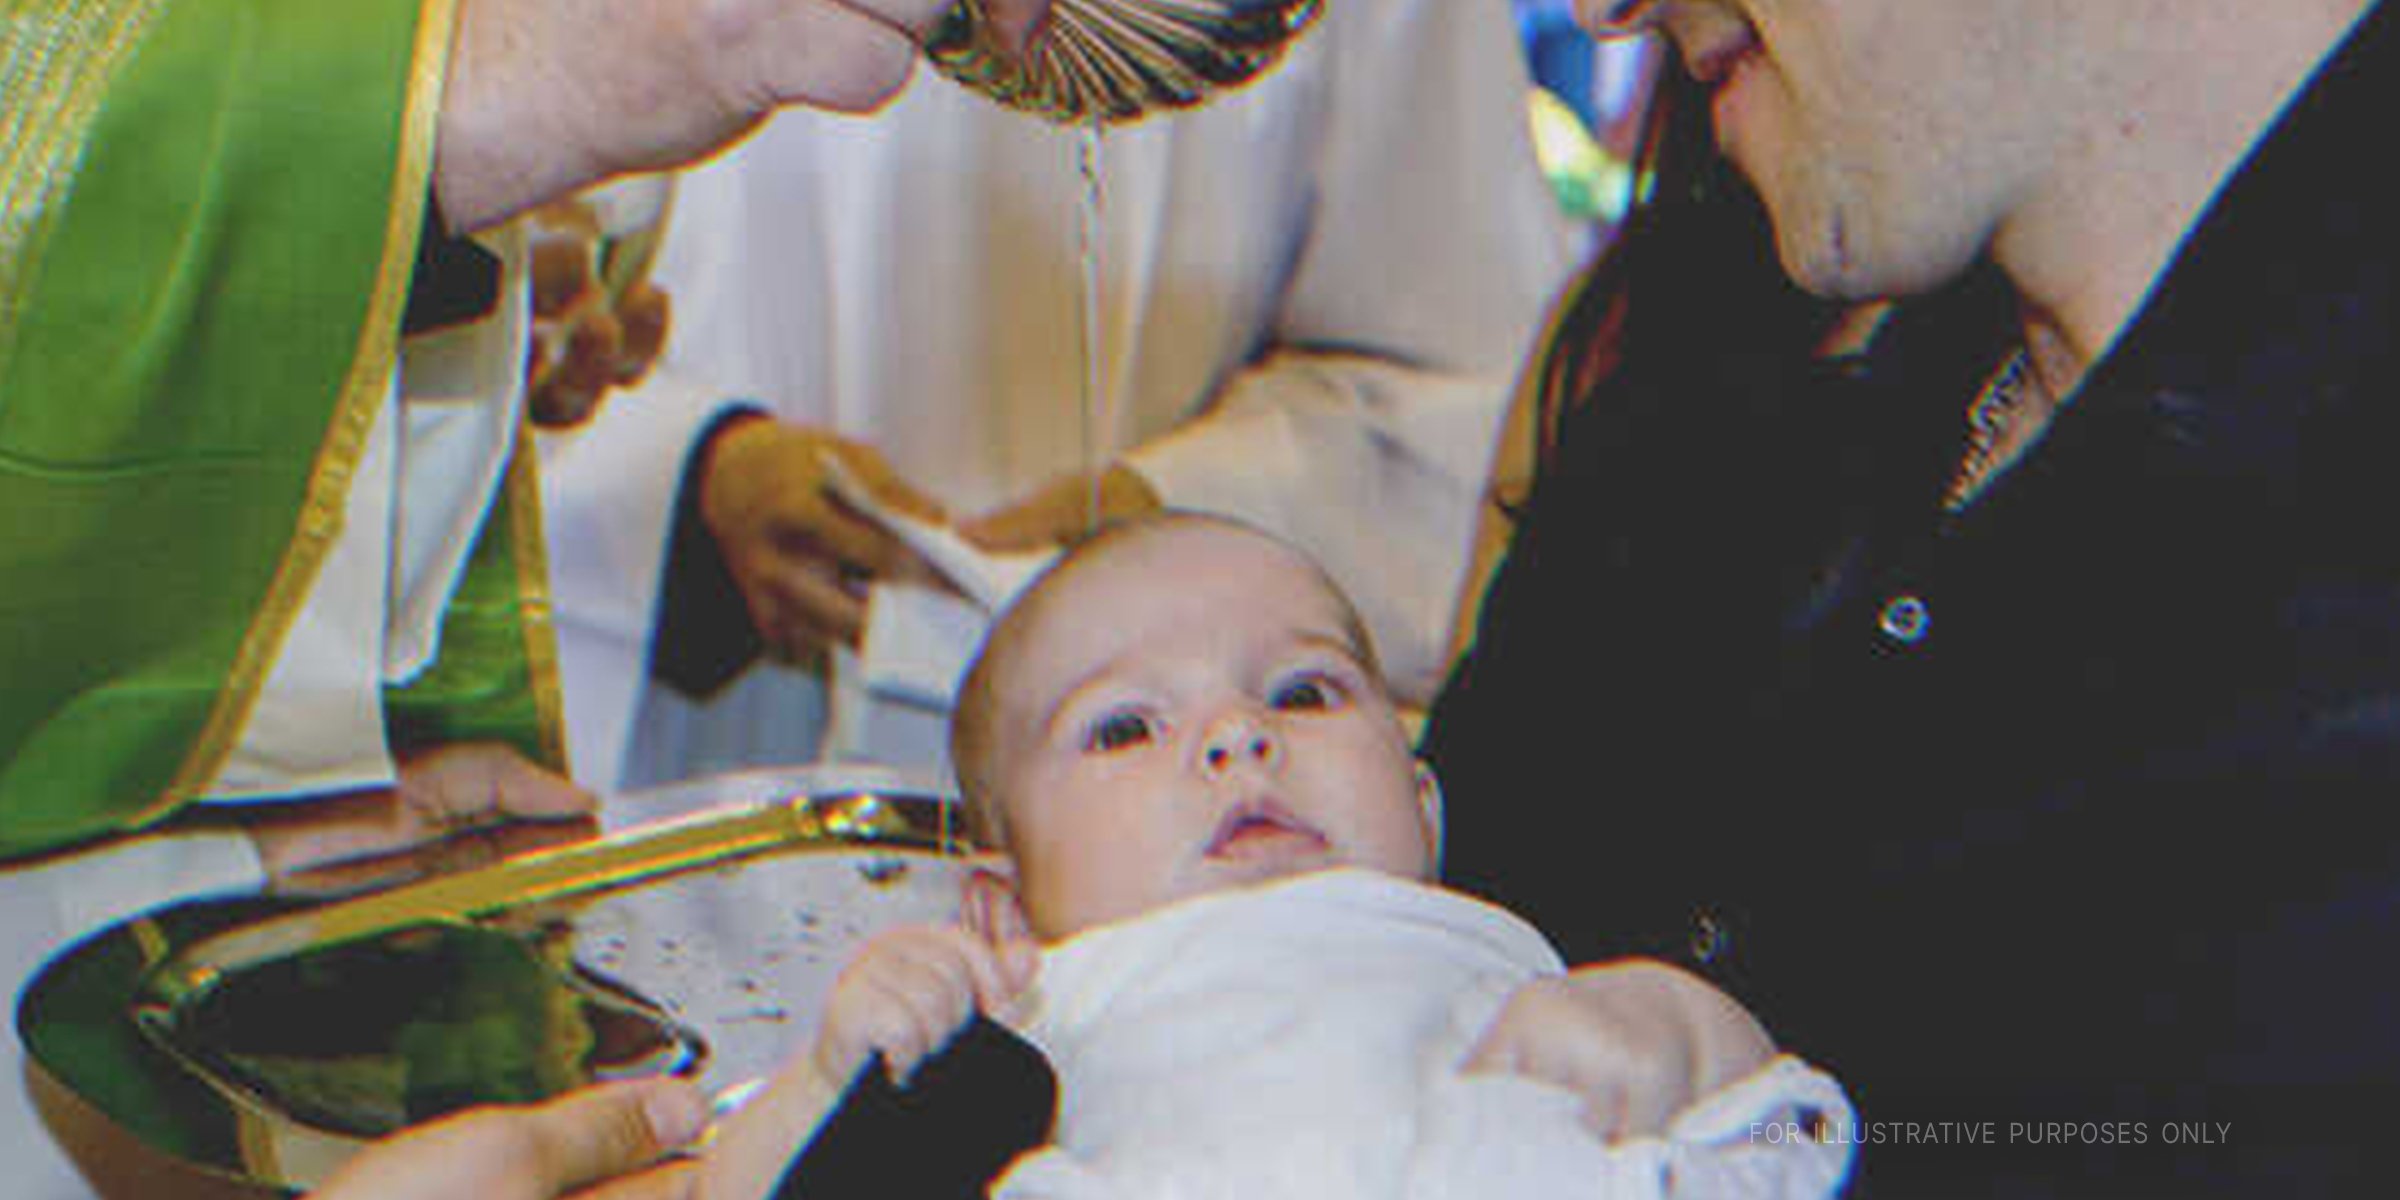 A baby being baptized. | Getty Images